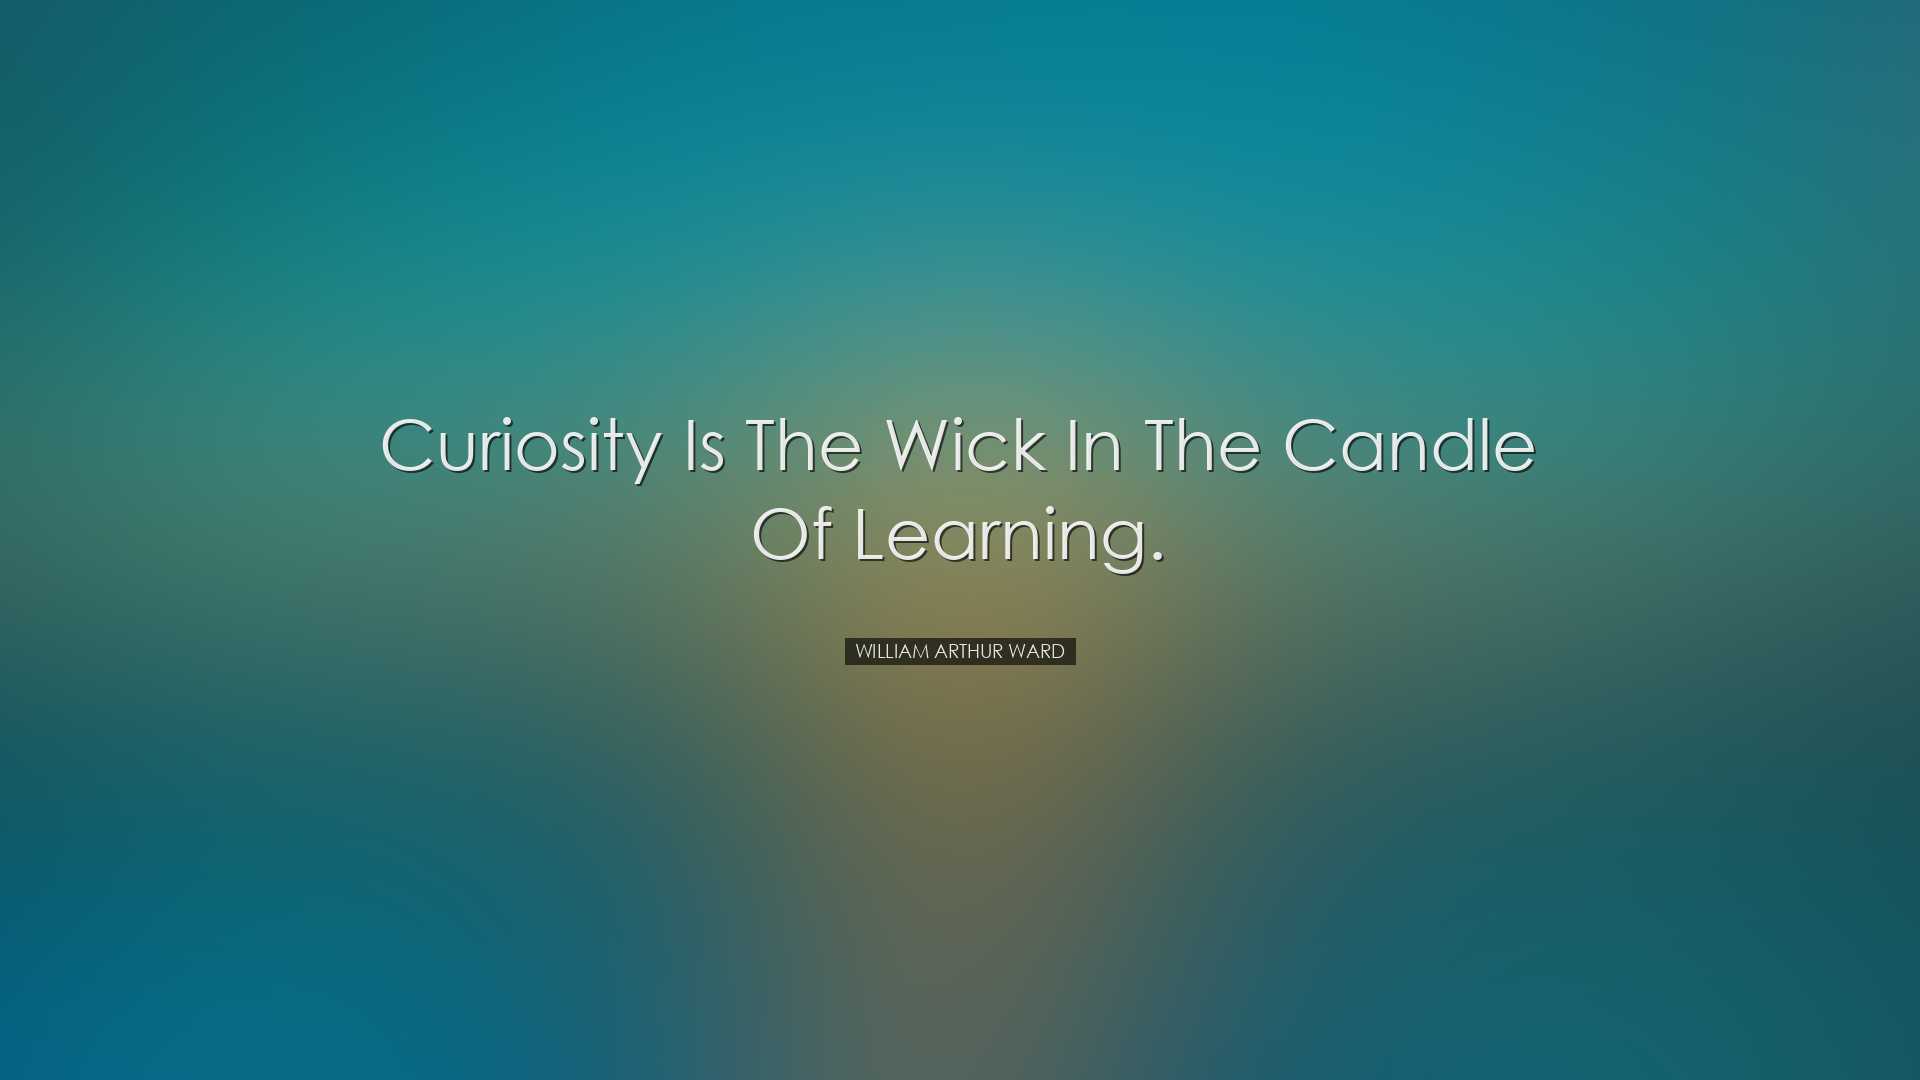 Curiosity is the wick in the candle of learning. - William Arthur